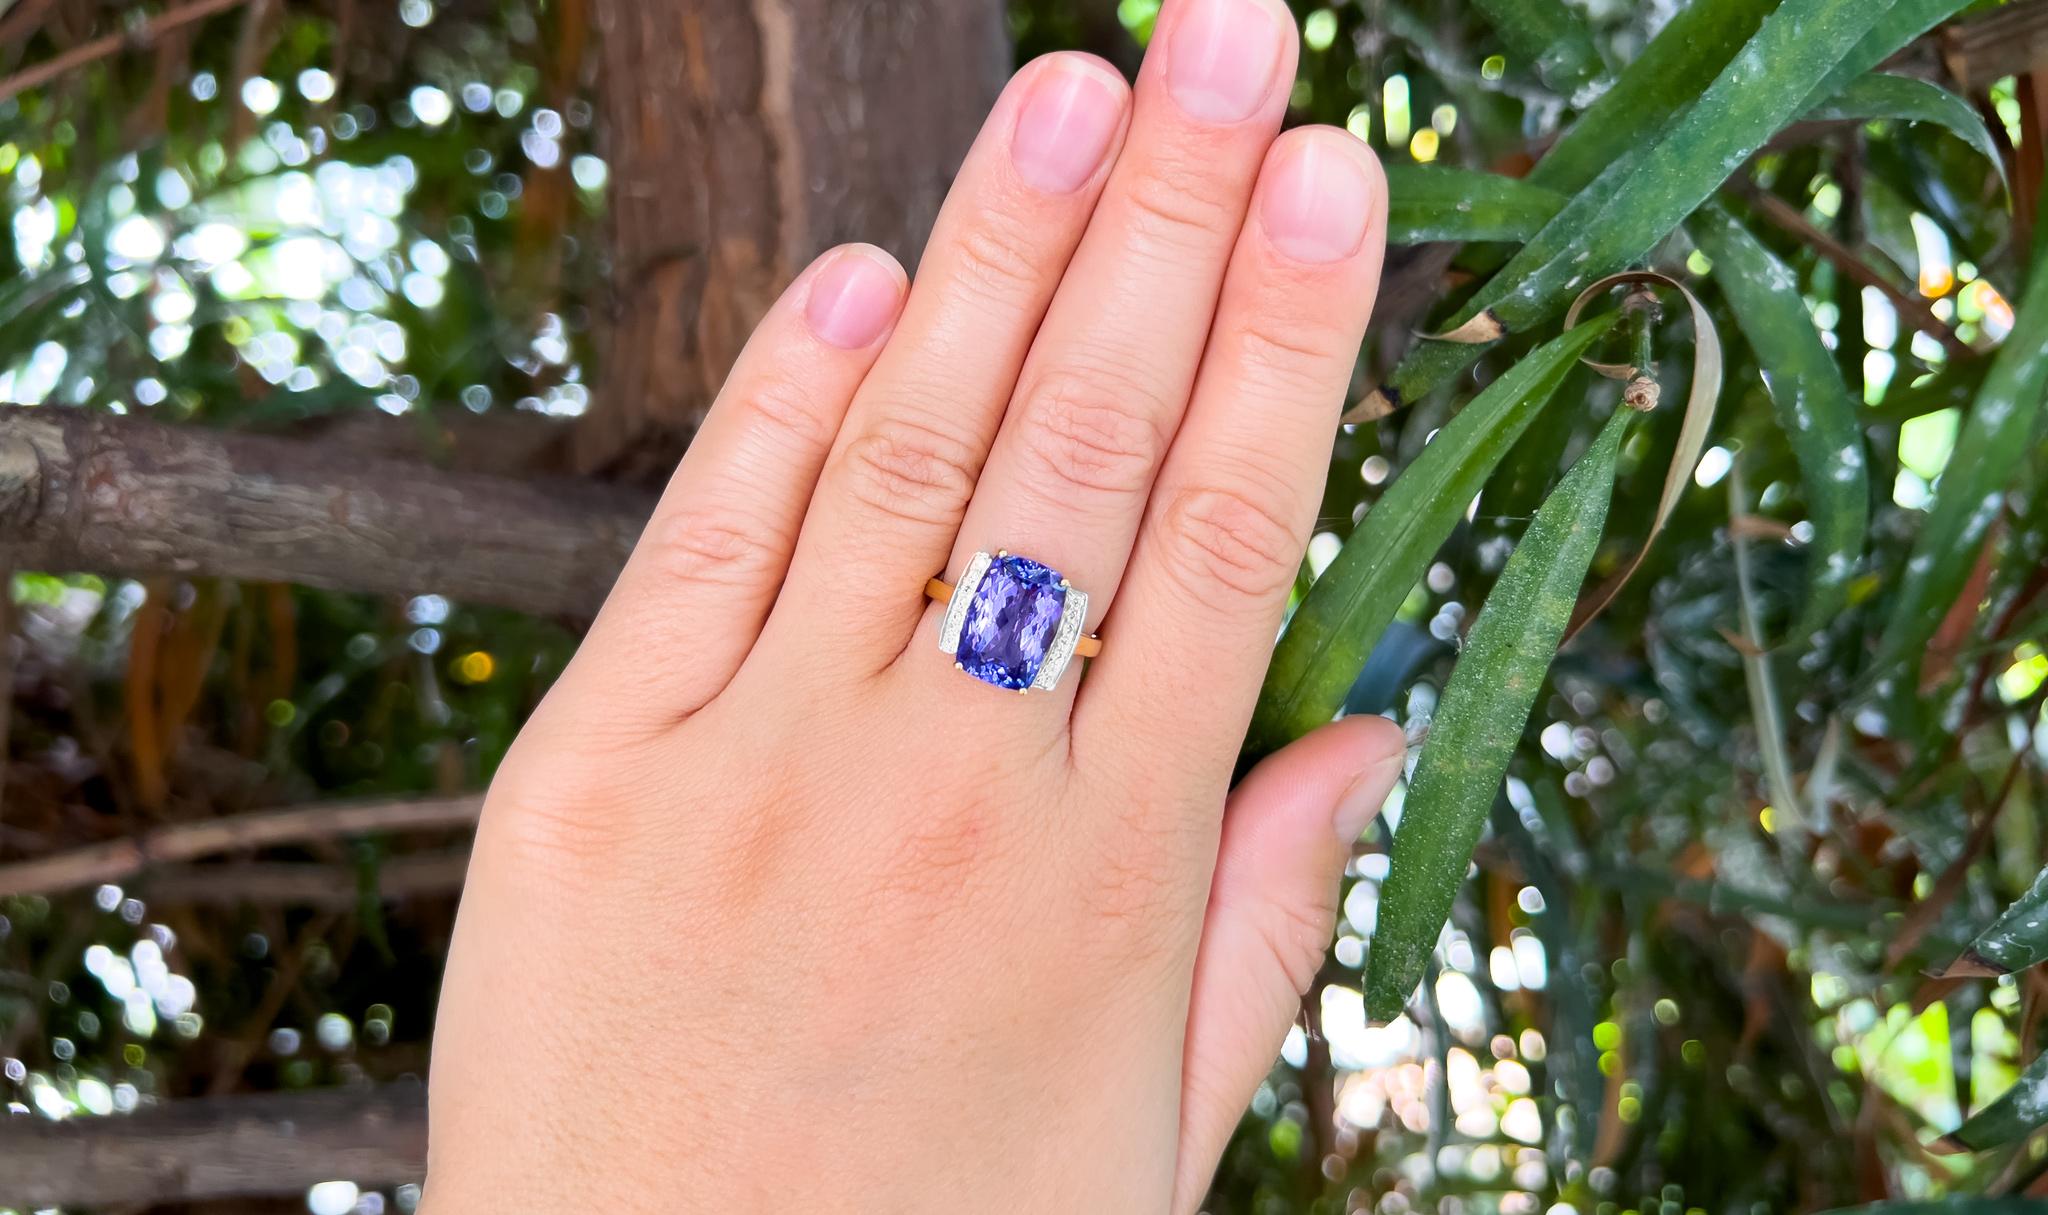 Cushion Cut 6.20 Carat Tanzanite Ring with Diamonds 18k Gold In Excellent Condition For Sale In Laguna Niguel, CA